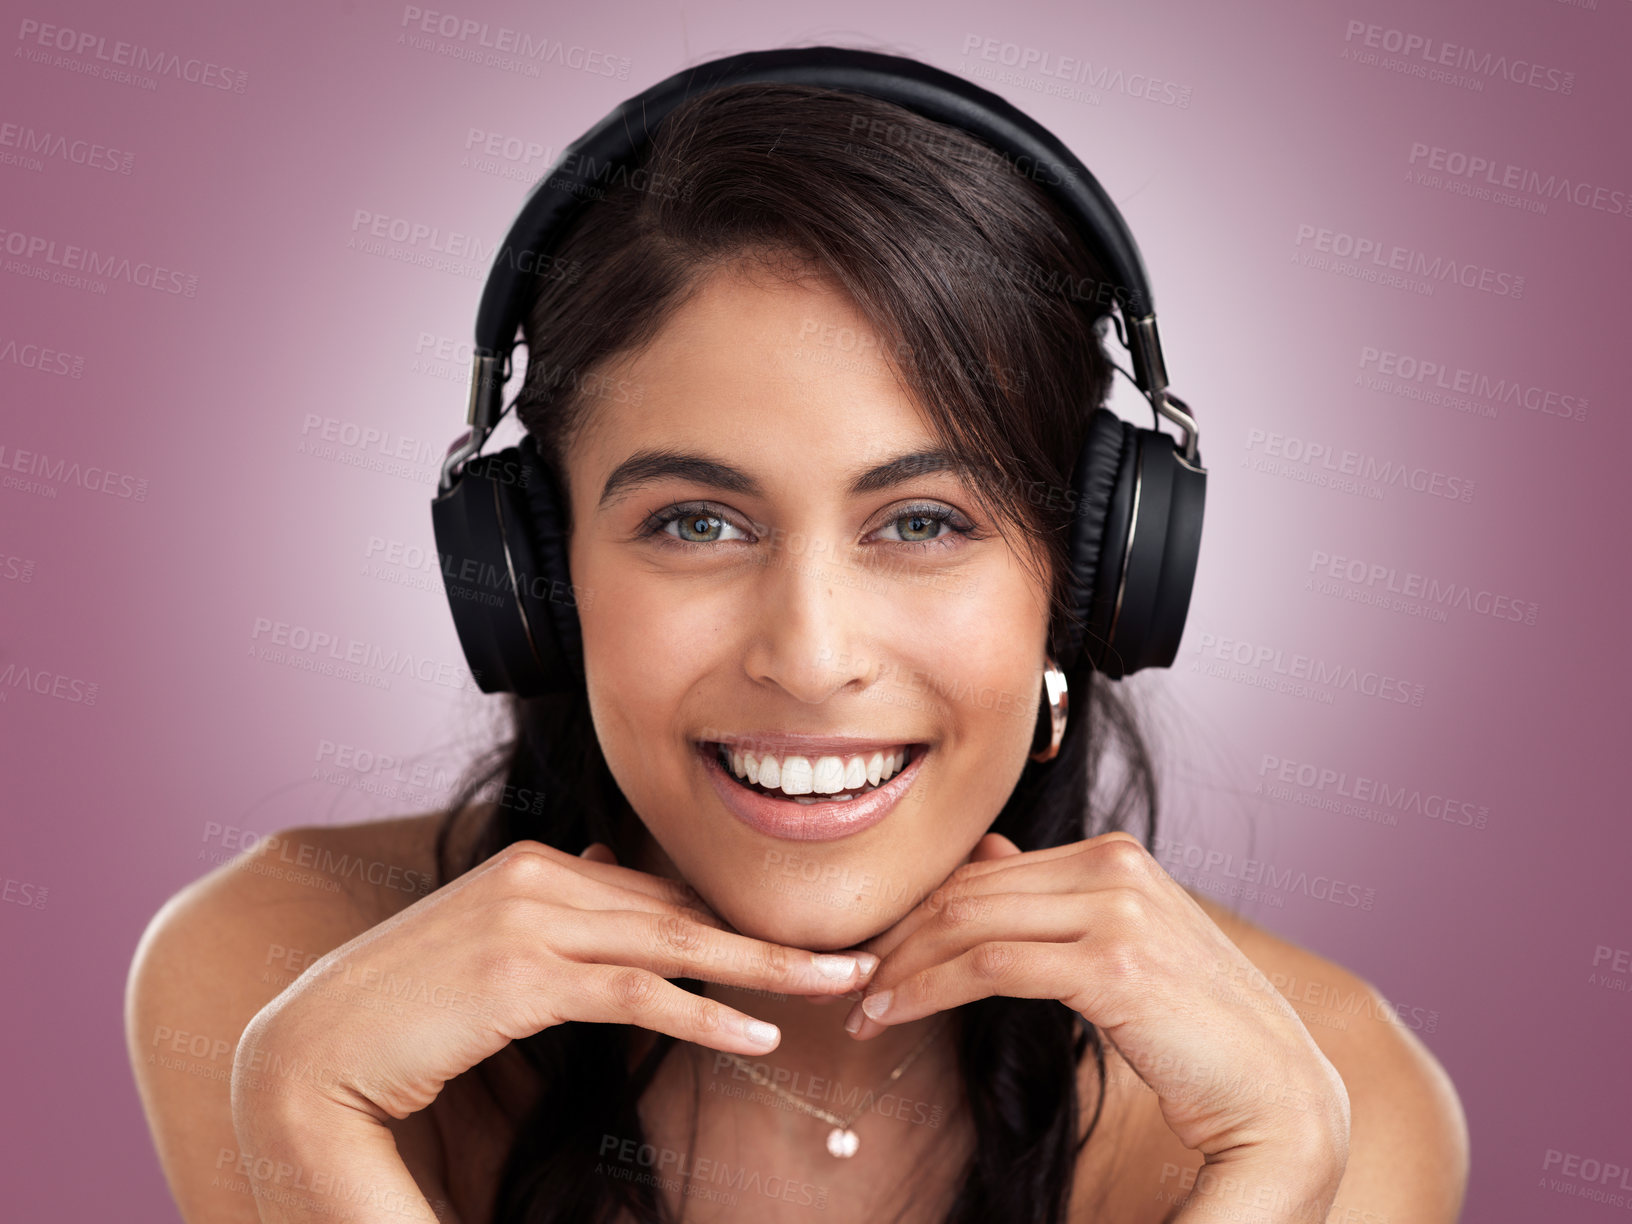 Buy stock photo Shot of a beautiful young smiling woman with her hands rested on her chin while wearing headphones against a pink background